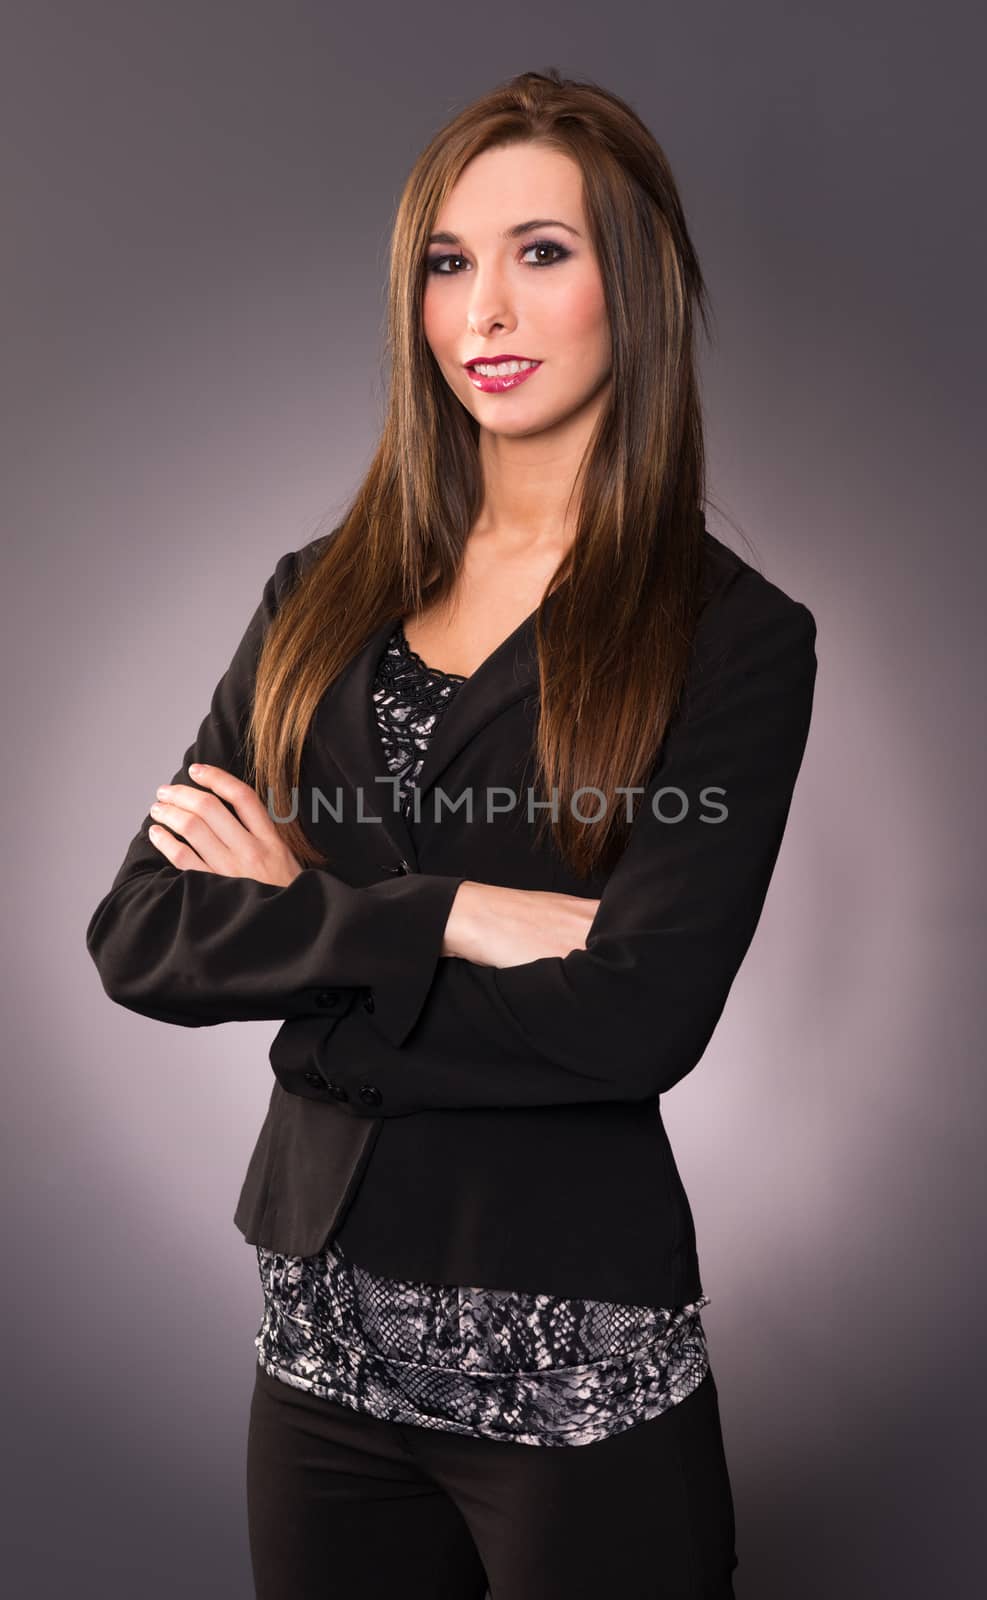 Attractive Brunette Female Business Woman Arm Crossed Office by ChrisBoswell